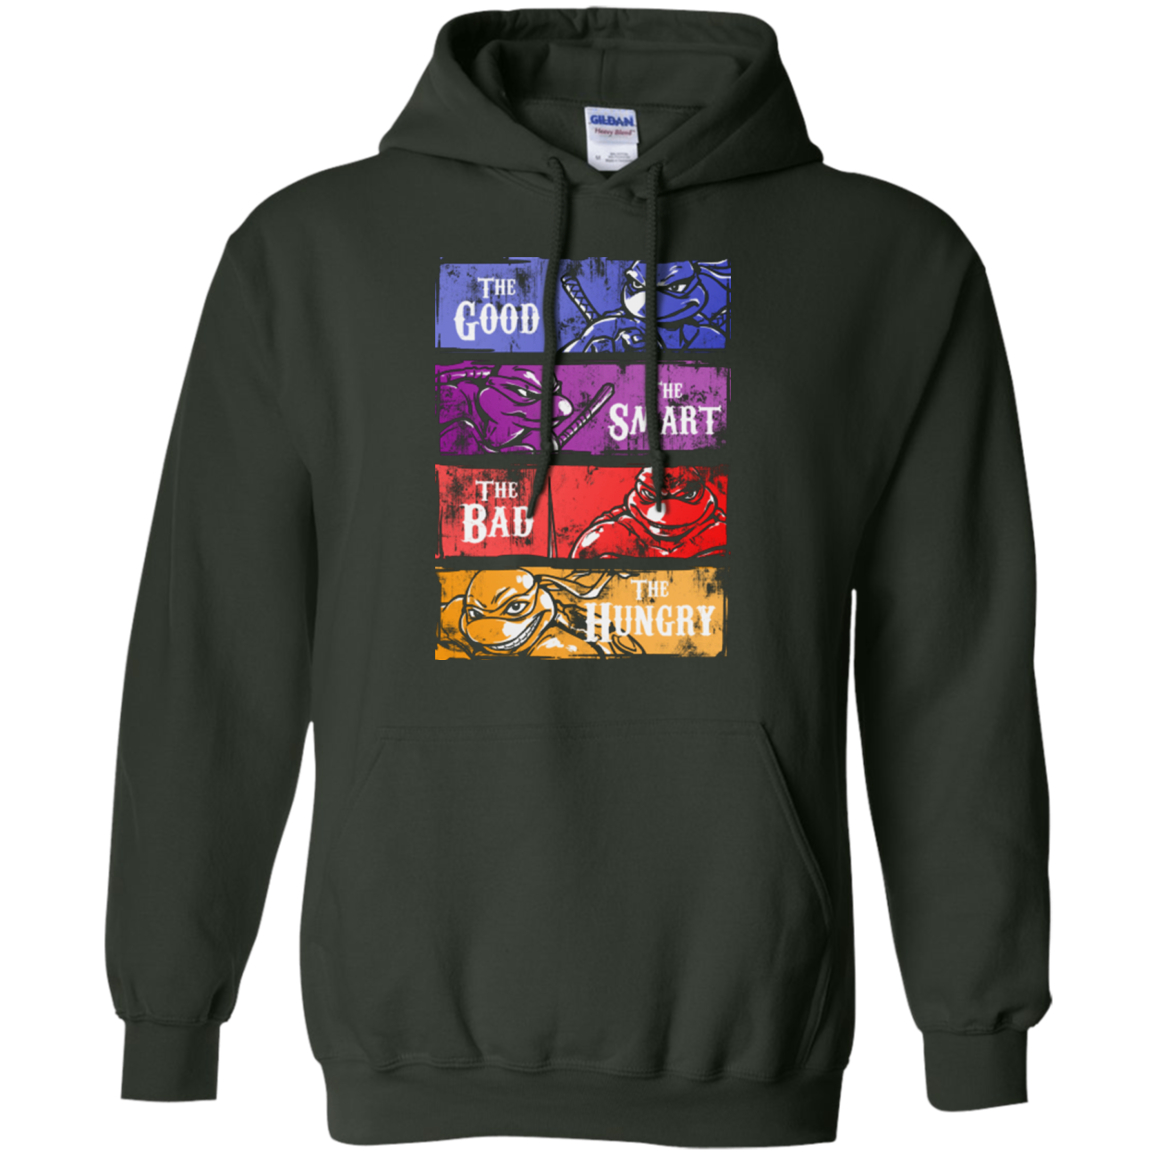 The Good, Bad, Smart and Hungry Pullover Hoodie